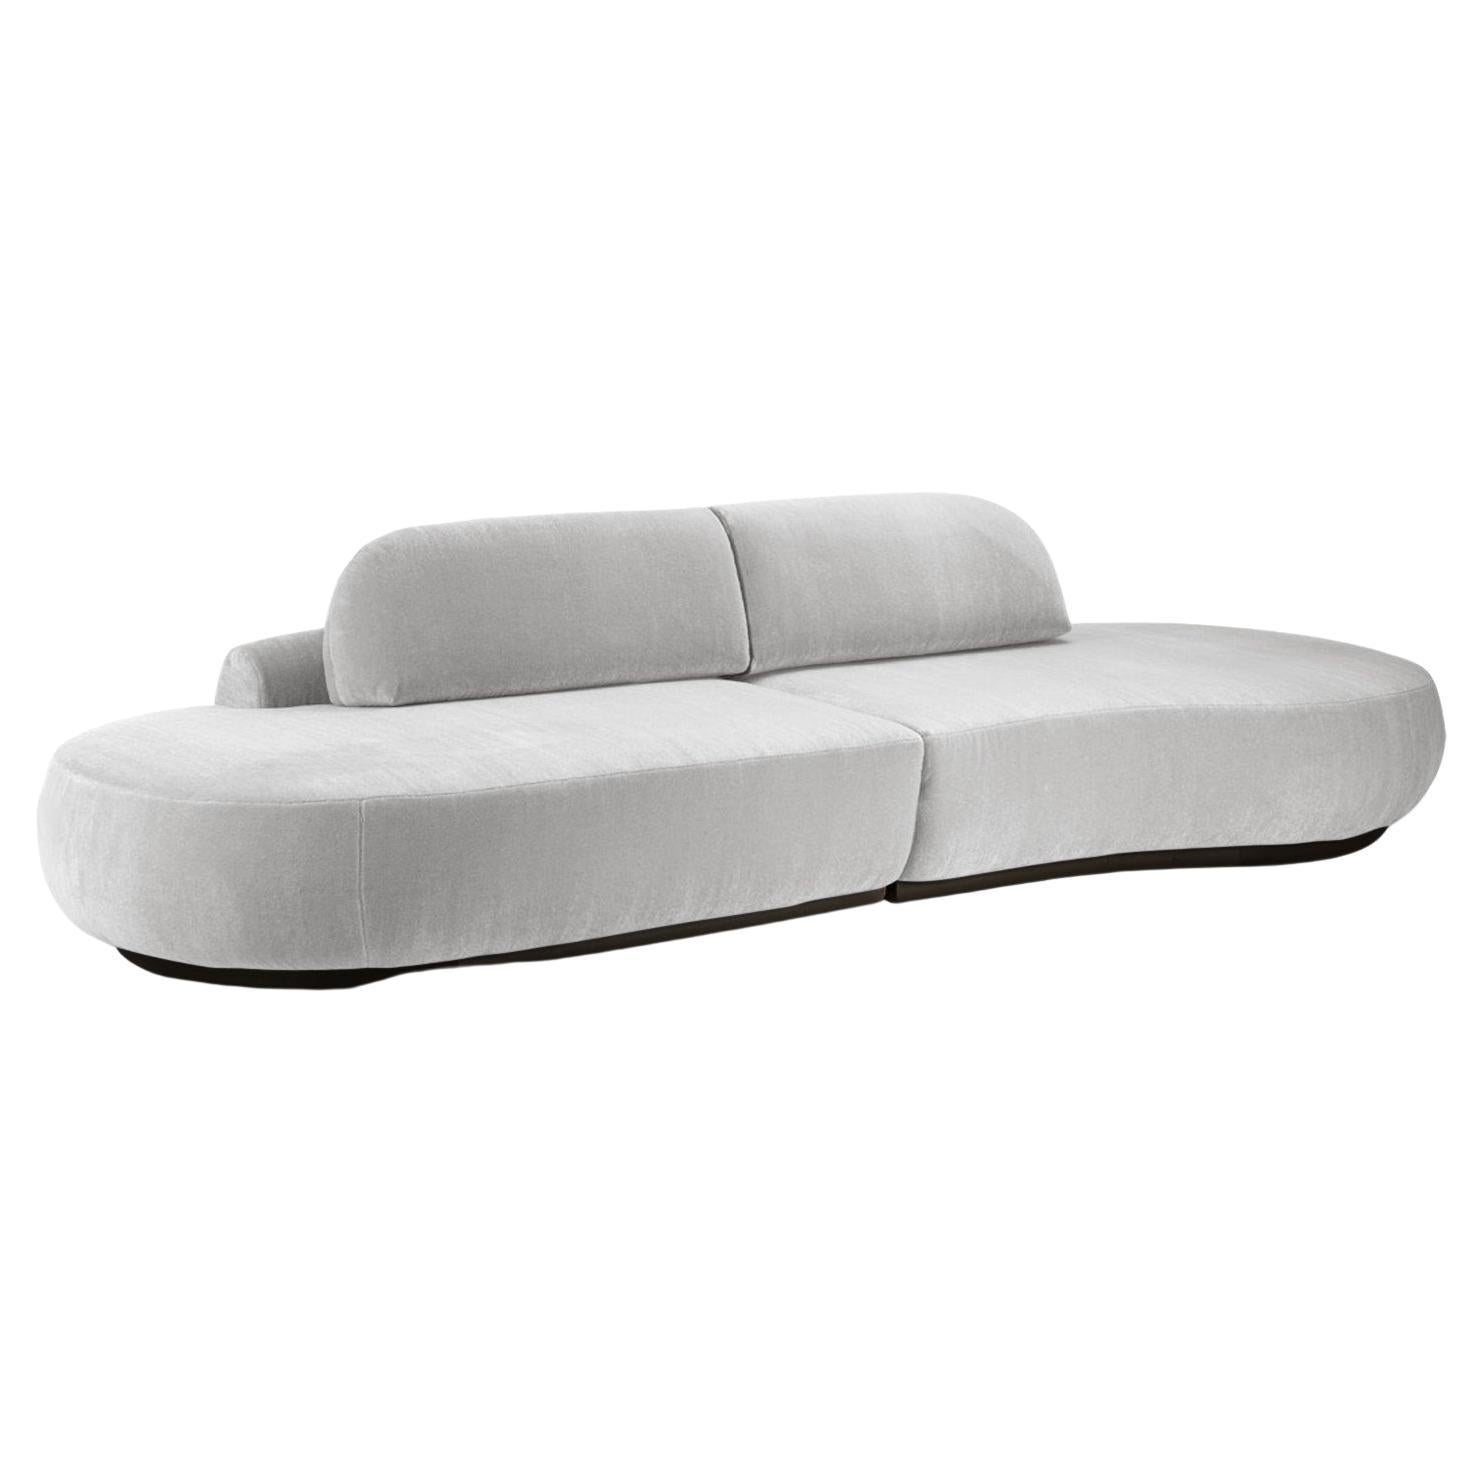 Naked Curved Sectional Sofa, 2 Piece with Beech Ash-056-5 and Aluminium For Sale